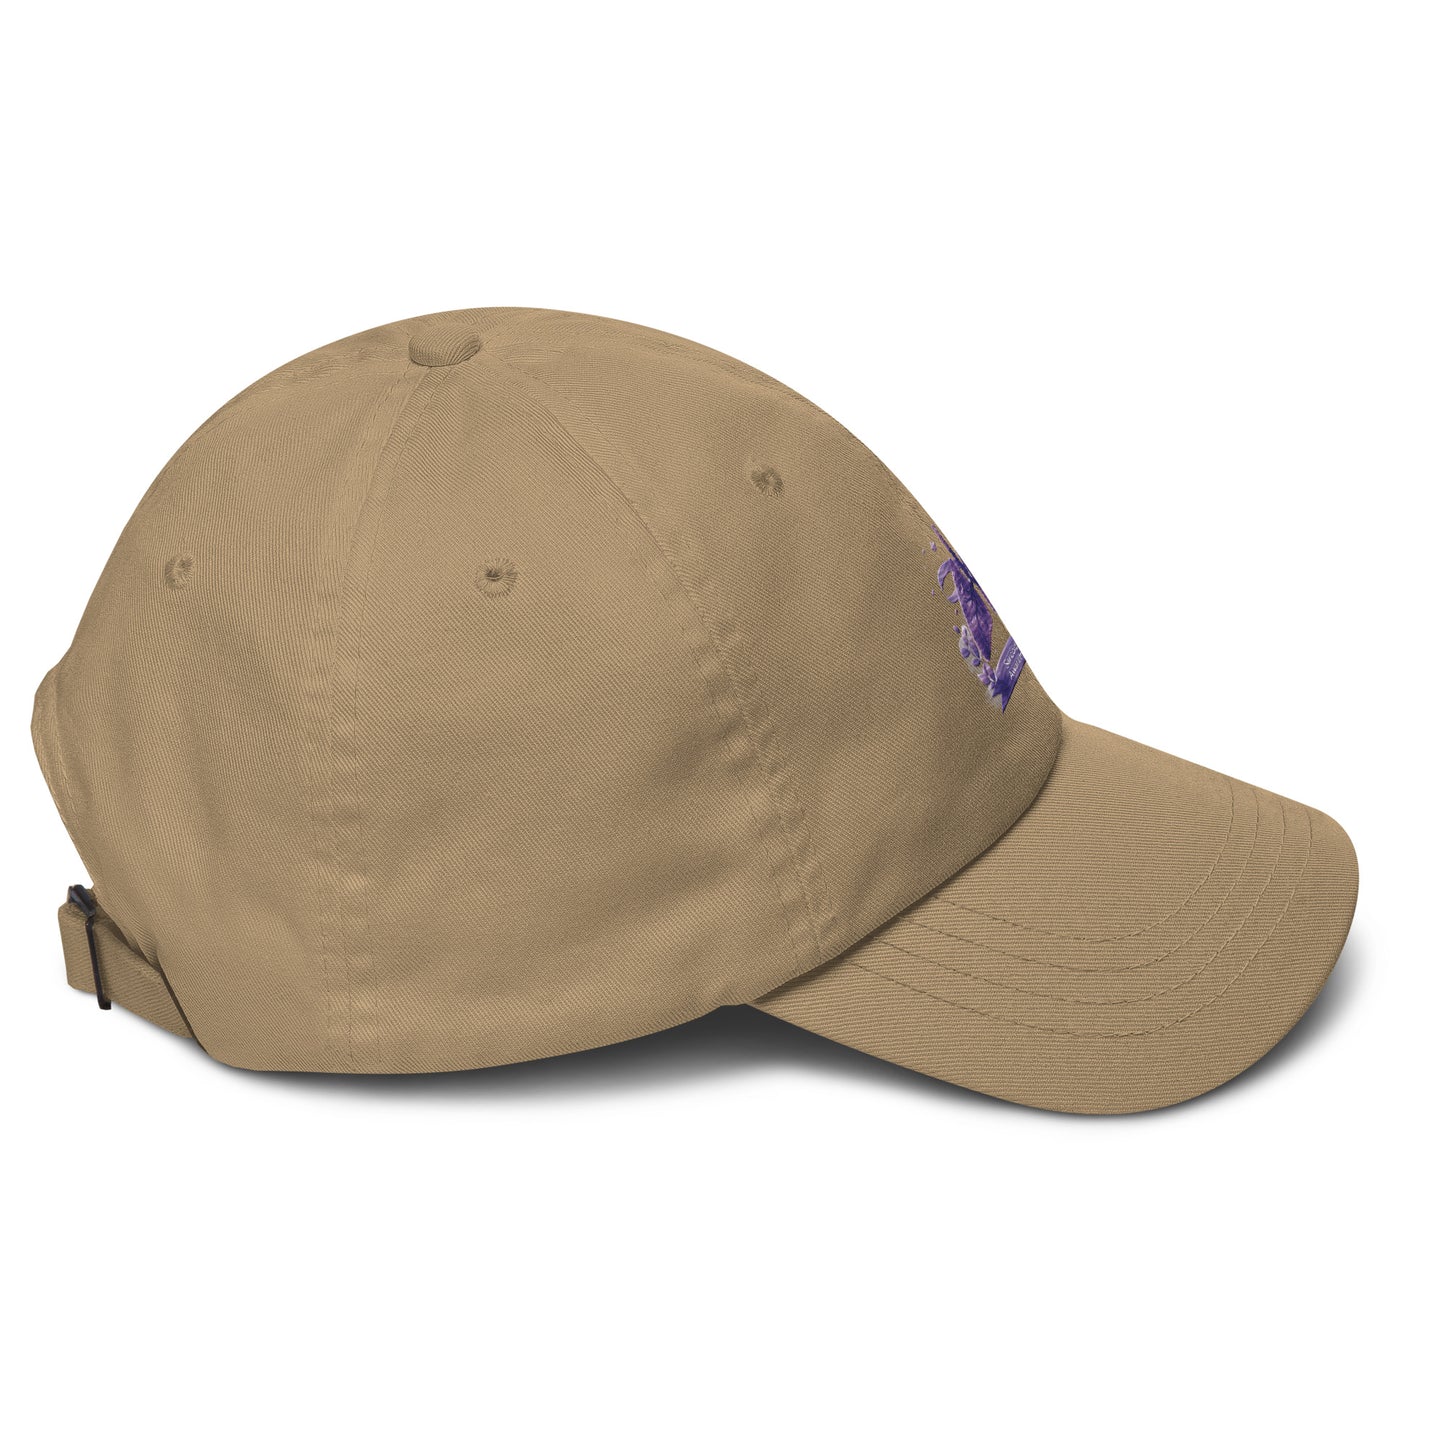 I Sport Purple For Sarcoidosis Awareness Butterfly Dad Cap